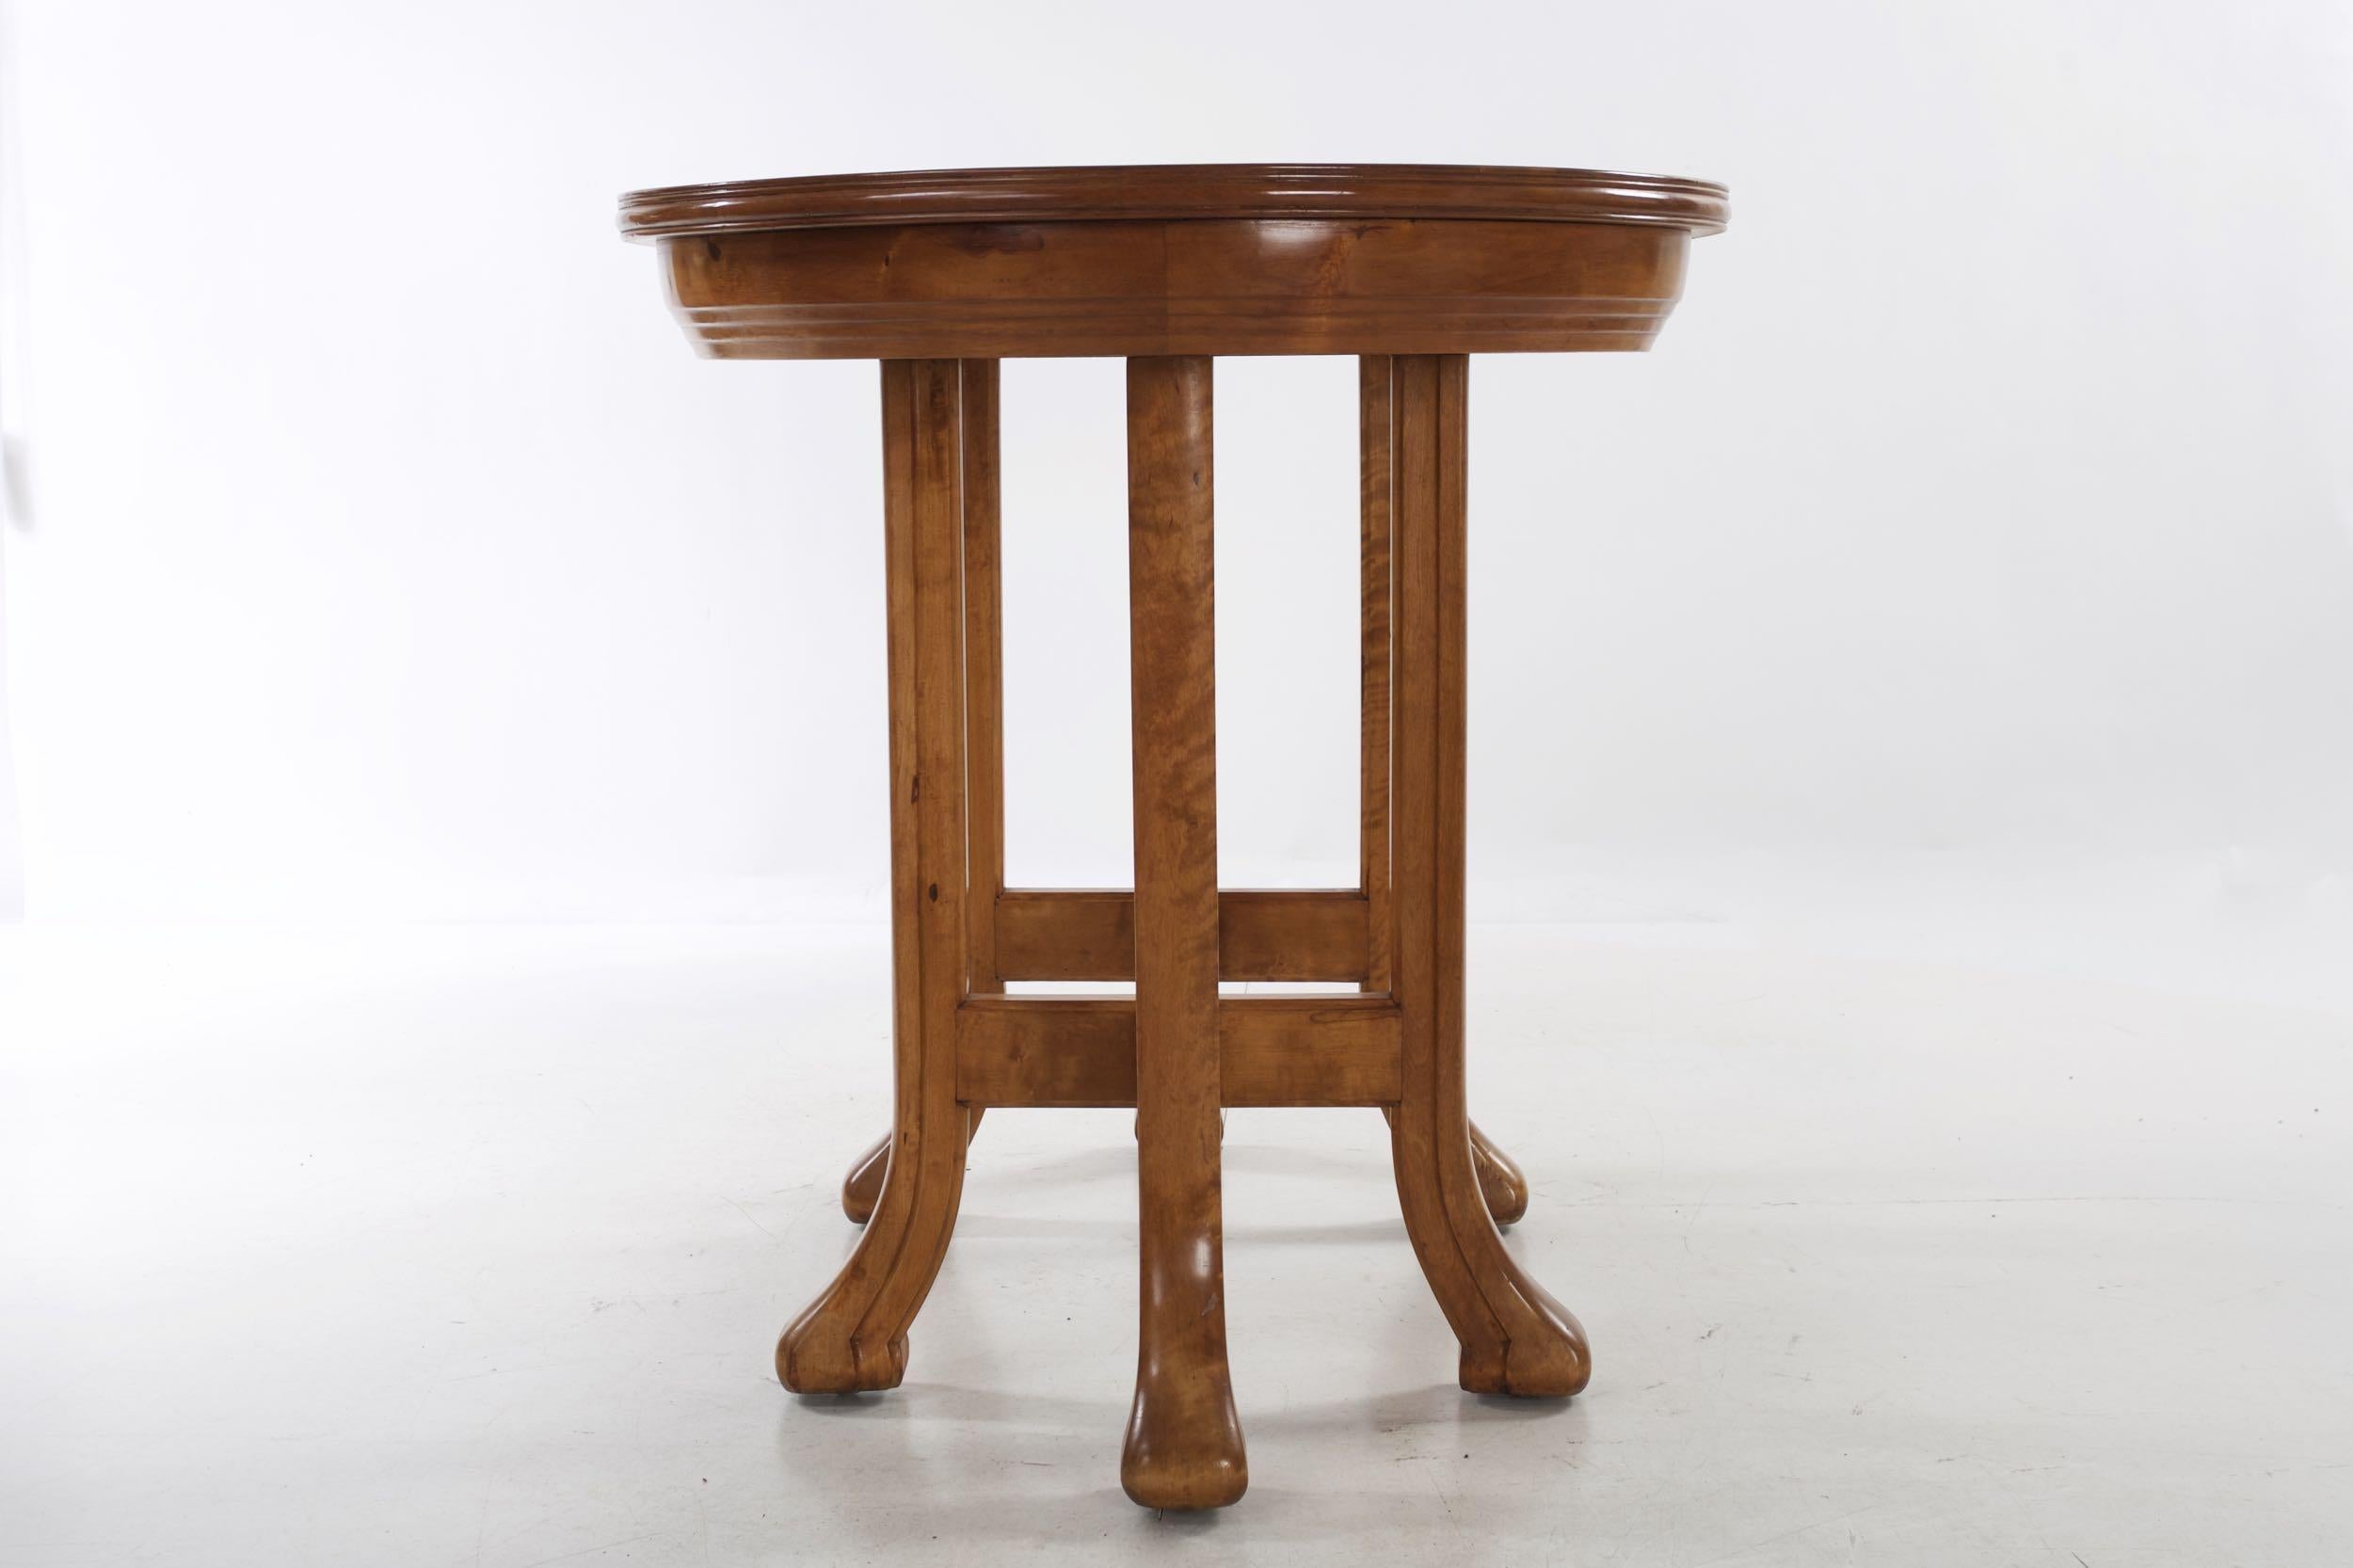 Swedish Grace Antique Inlaid Birch Center Table, circa 1920-1930 In Good Condition For Sale In Shippensburg, PA